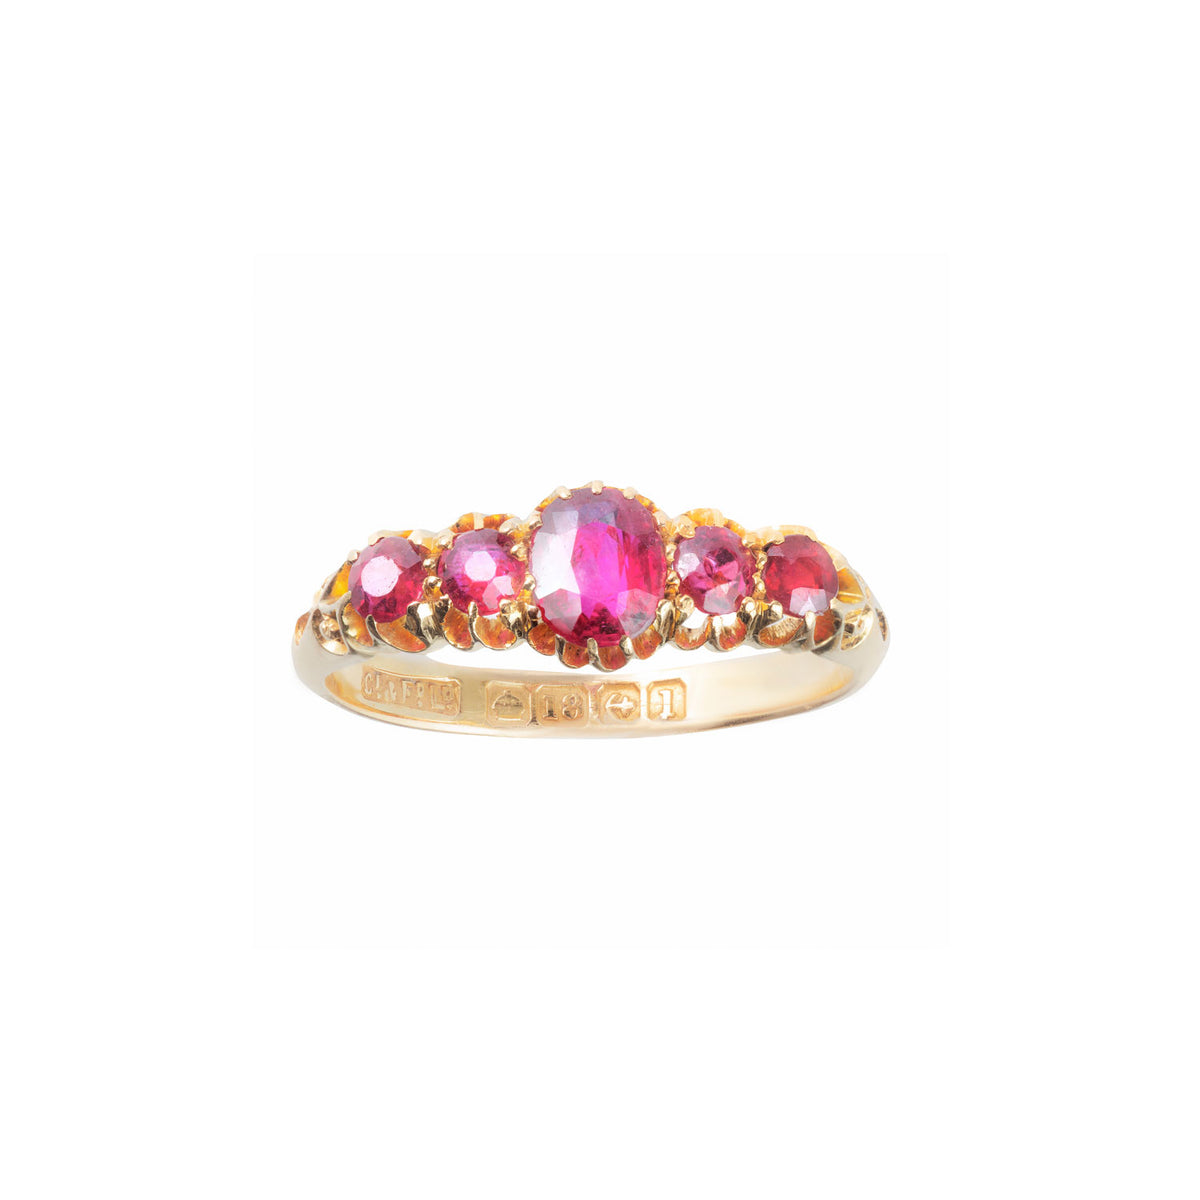 An Antique Ruby Ring